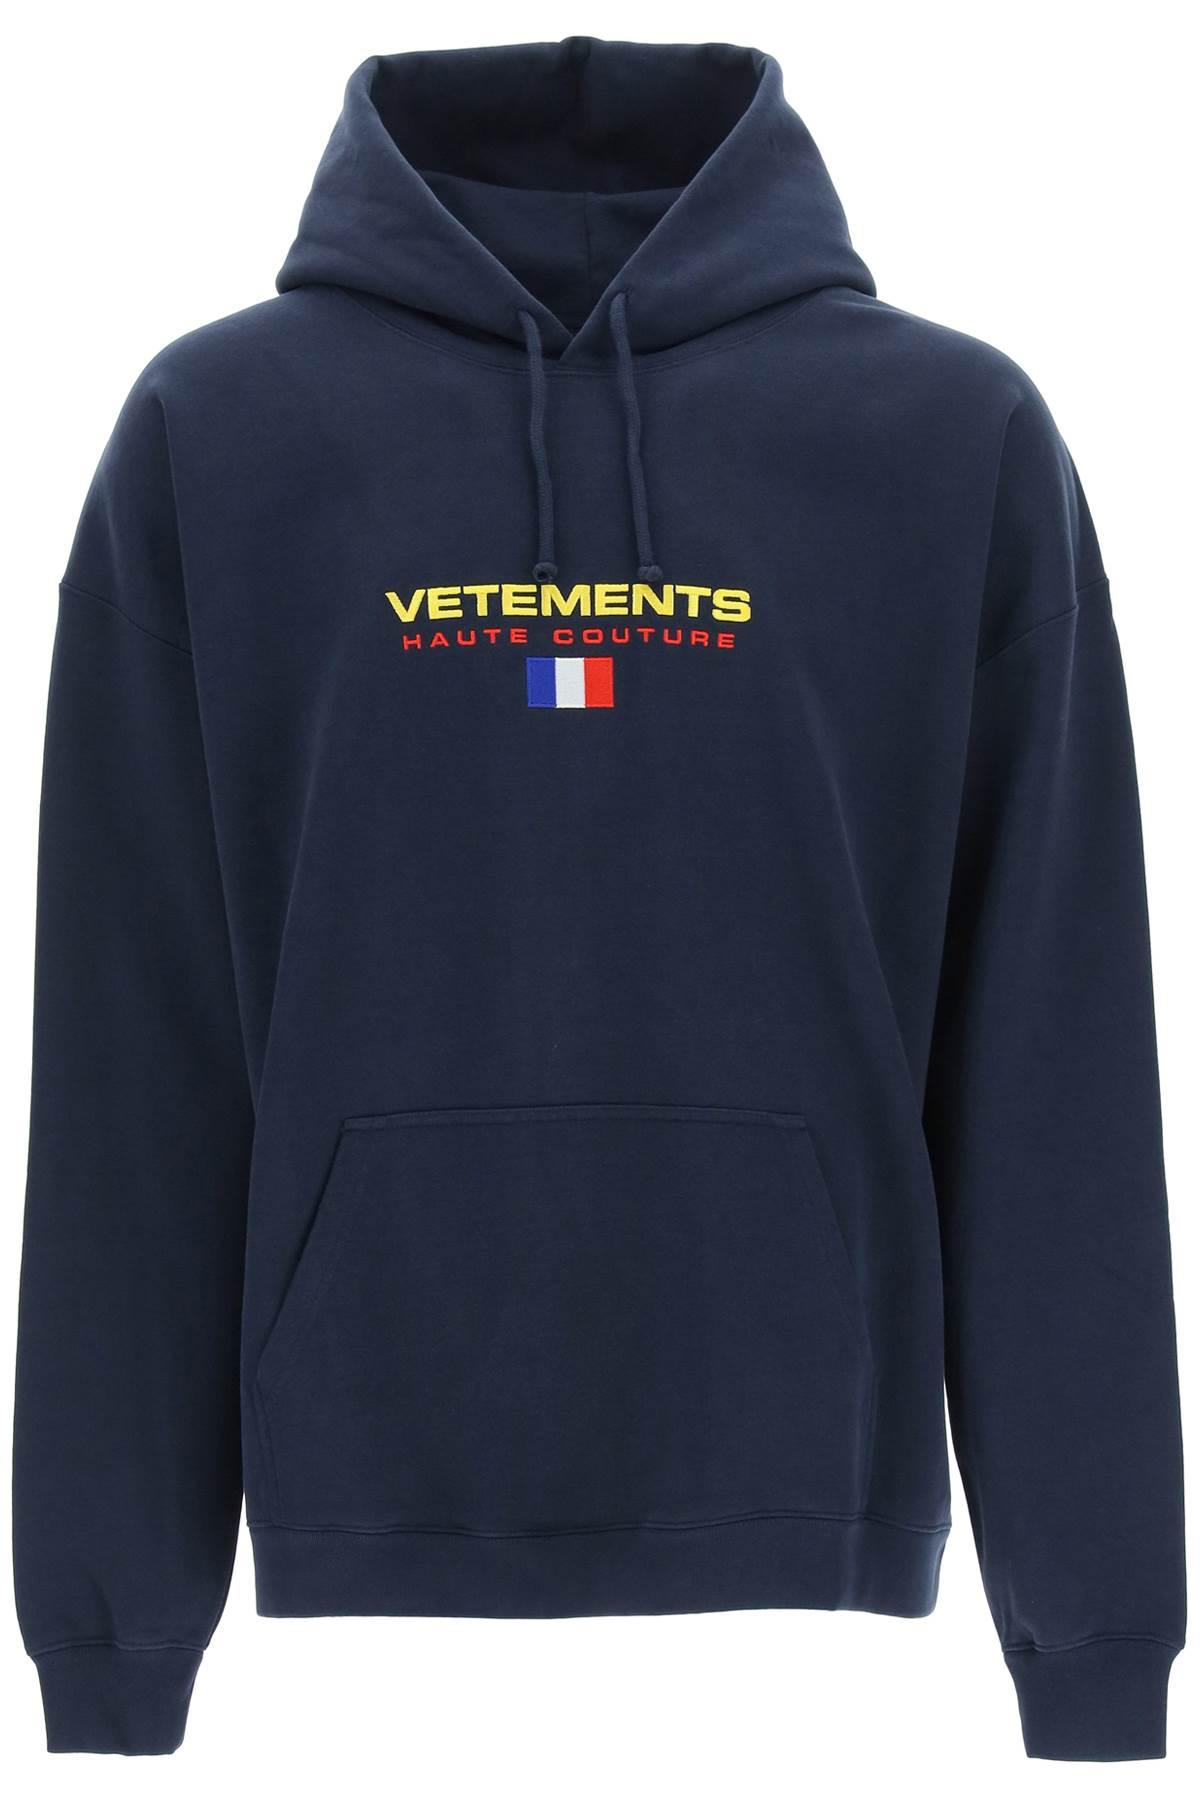 Vetements Cotton Haute Couture Hoodie in Navy (Blue) (Blue) for Men - Save  58% | Lyst